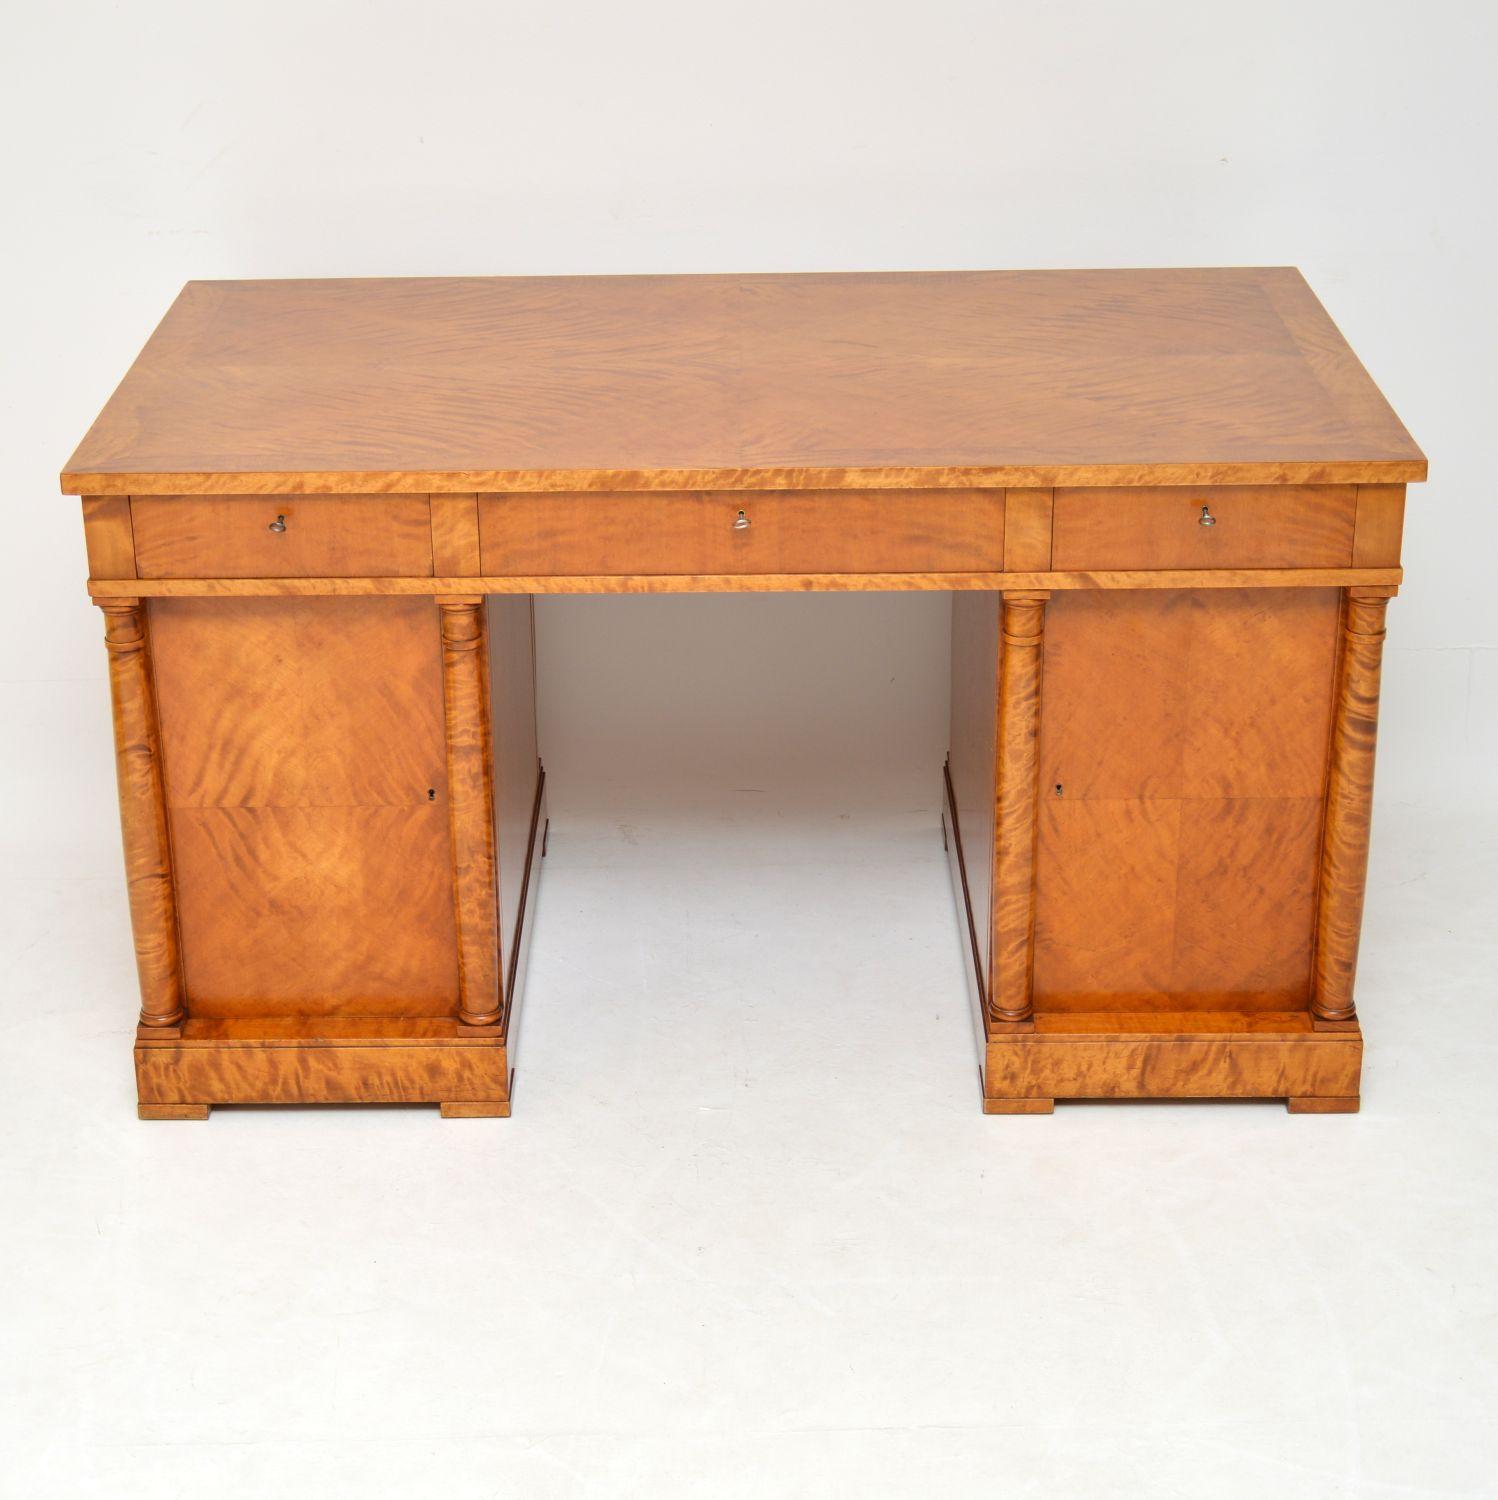 Antique Swedish satin birch pedestal desk which is finished off & polished just as nicely on the back. It’s Biedermeier style, a lovely blond color & dates to circa 1920s period. This desk is very Fine quality, in excellent condition & has just been